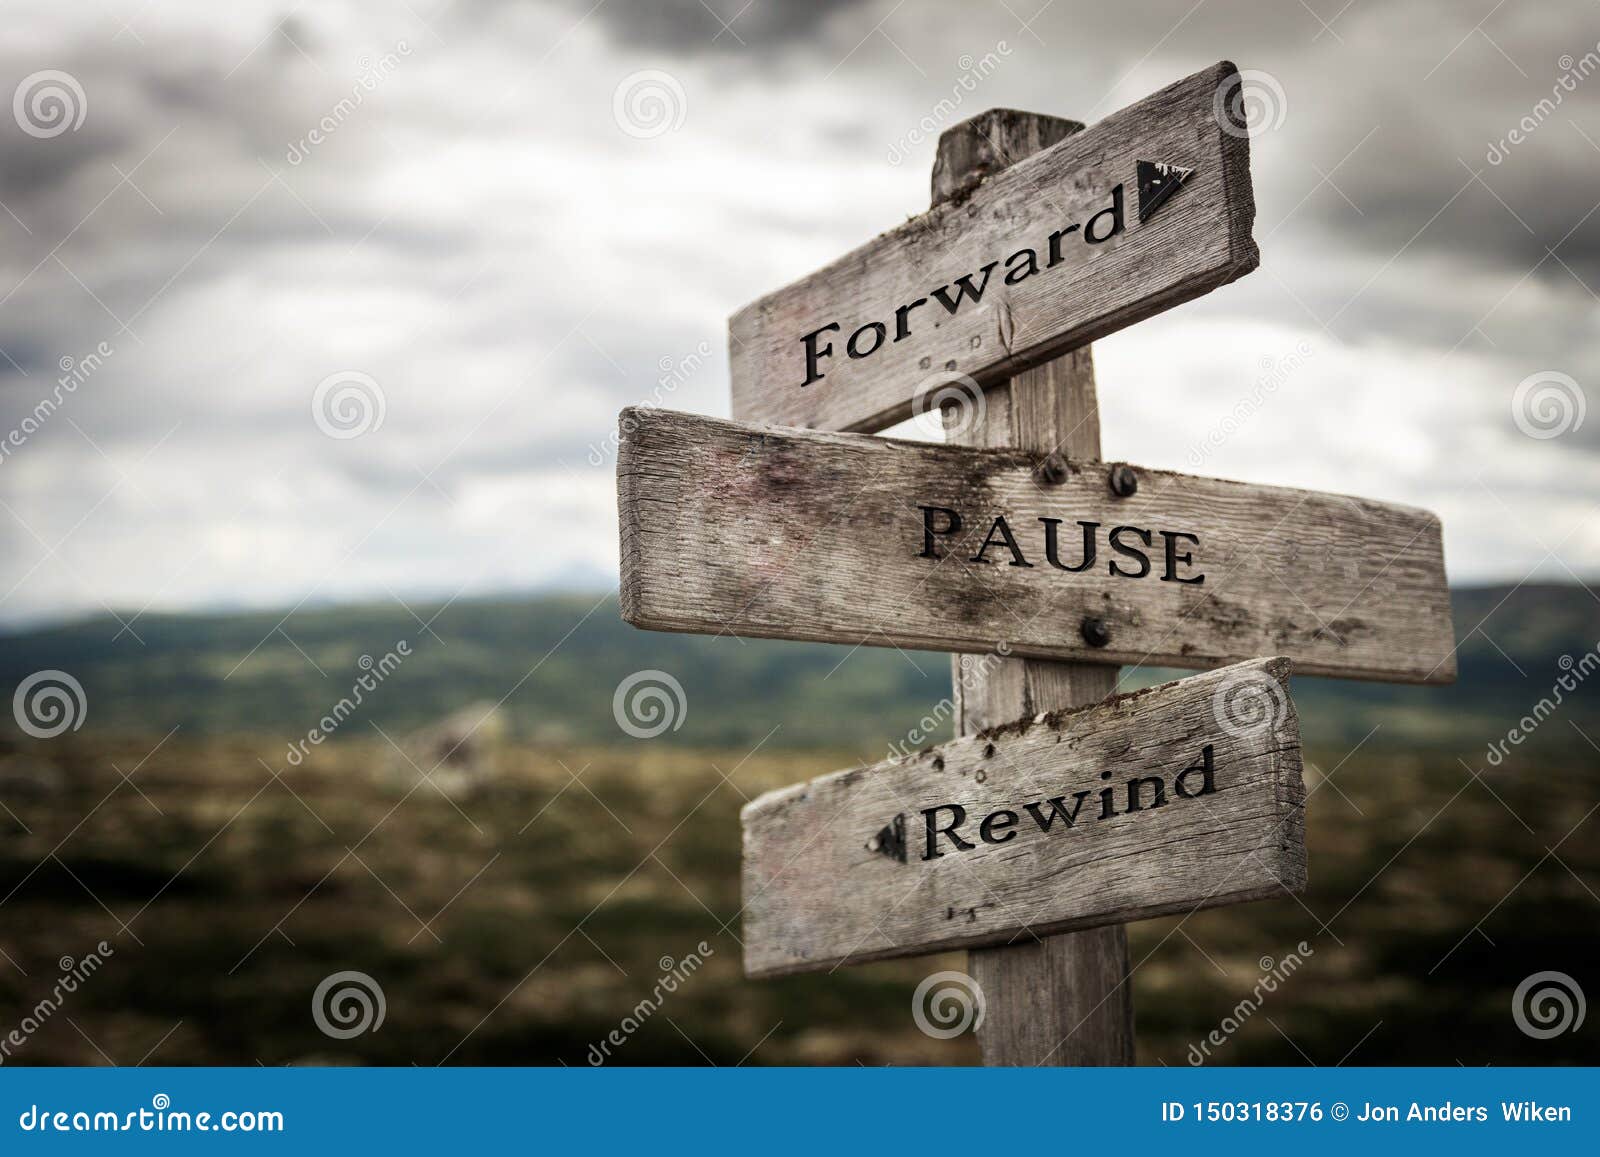 forward, pause, rewind signpost in nature.